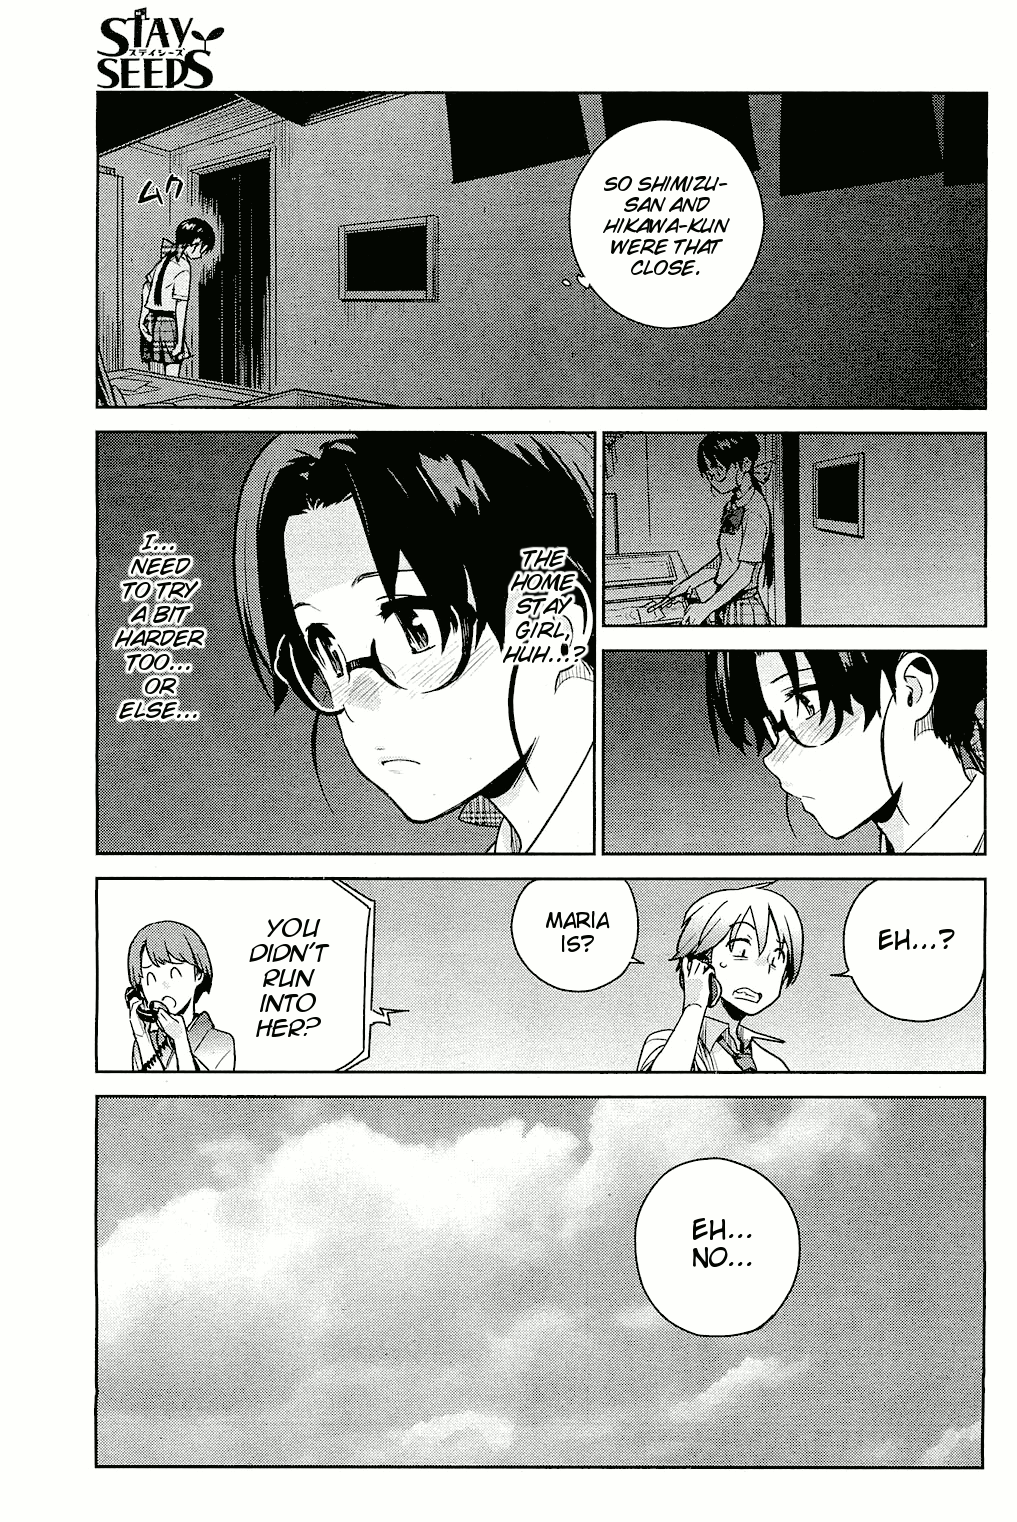 [Yukimi] Stay Seeds Ch. 1-2 [English] [Anonymous, TV+MumeiTL] [ゆきみ] STAY SEEDS 第1-2話 [英訳]